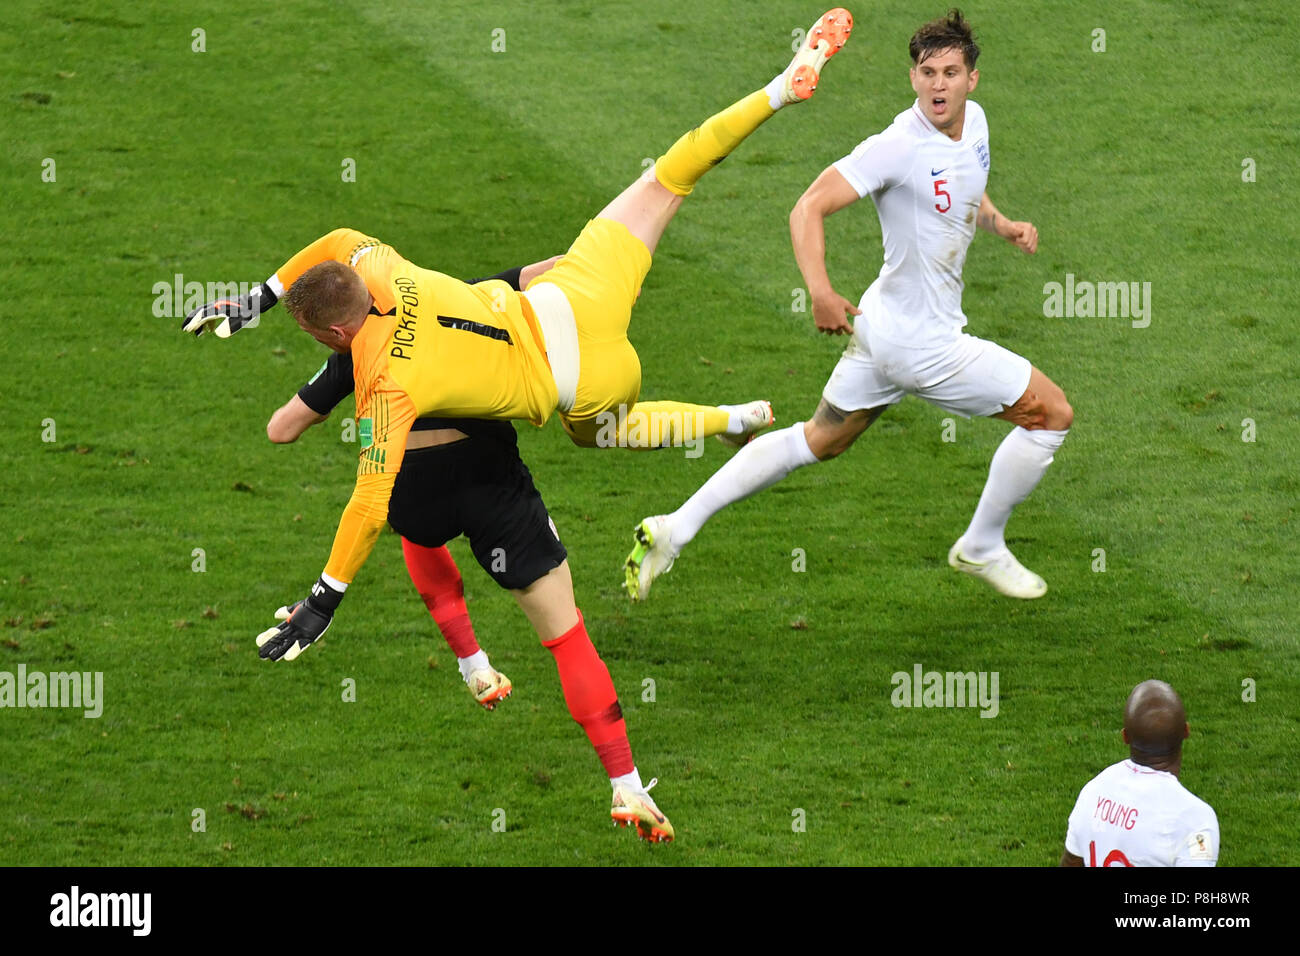 Moscow, Russia. 11th July, 2018.  Goalkeeper Jordan PICKFORD (ENG) jumps, dives over a Croatian player, action, duels, re: John STONES (ENG). Croatia (CRO) - England (ENG) 2-1 nV Semifinals, Round of Four, Match 62 on 07/11/2018 in Moscow, Luzhniki Stadium, Football World Cup 2018 in Russia from 14.06. - 15.07.2018. | usage worldwide Credit: dpa/Alamy Live News Credit: dpa picture alliance/Alamy Live News Stock Photo